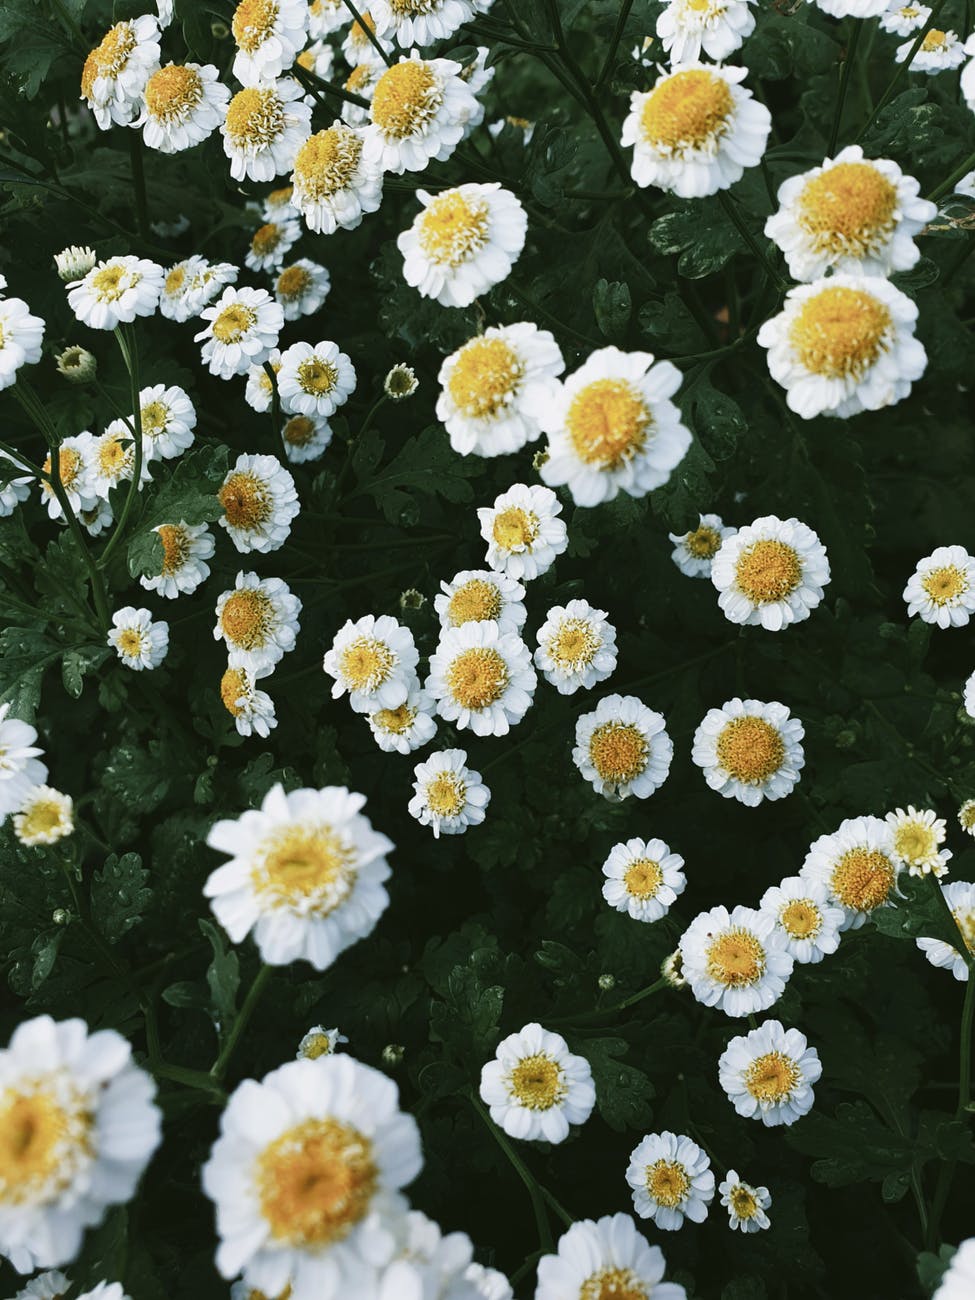 close up photo of blooming feverfew flowers